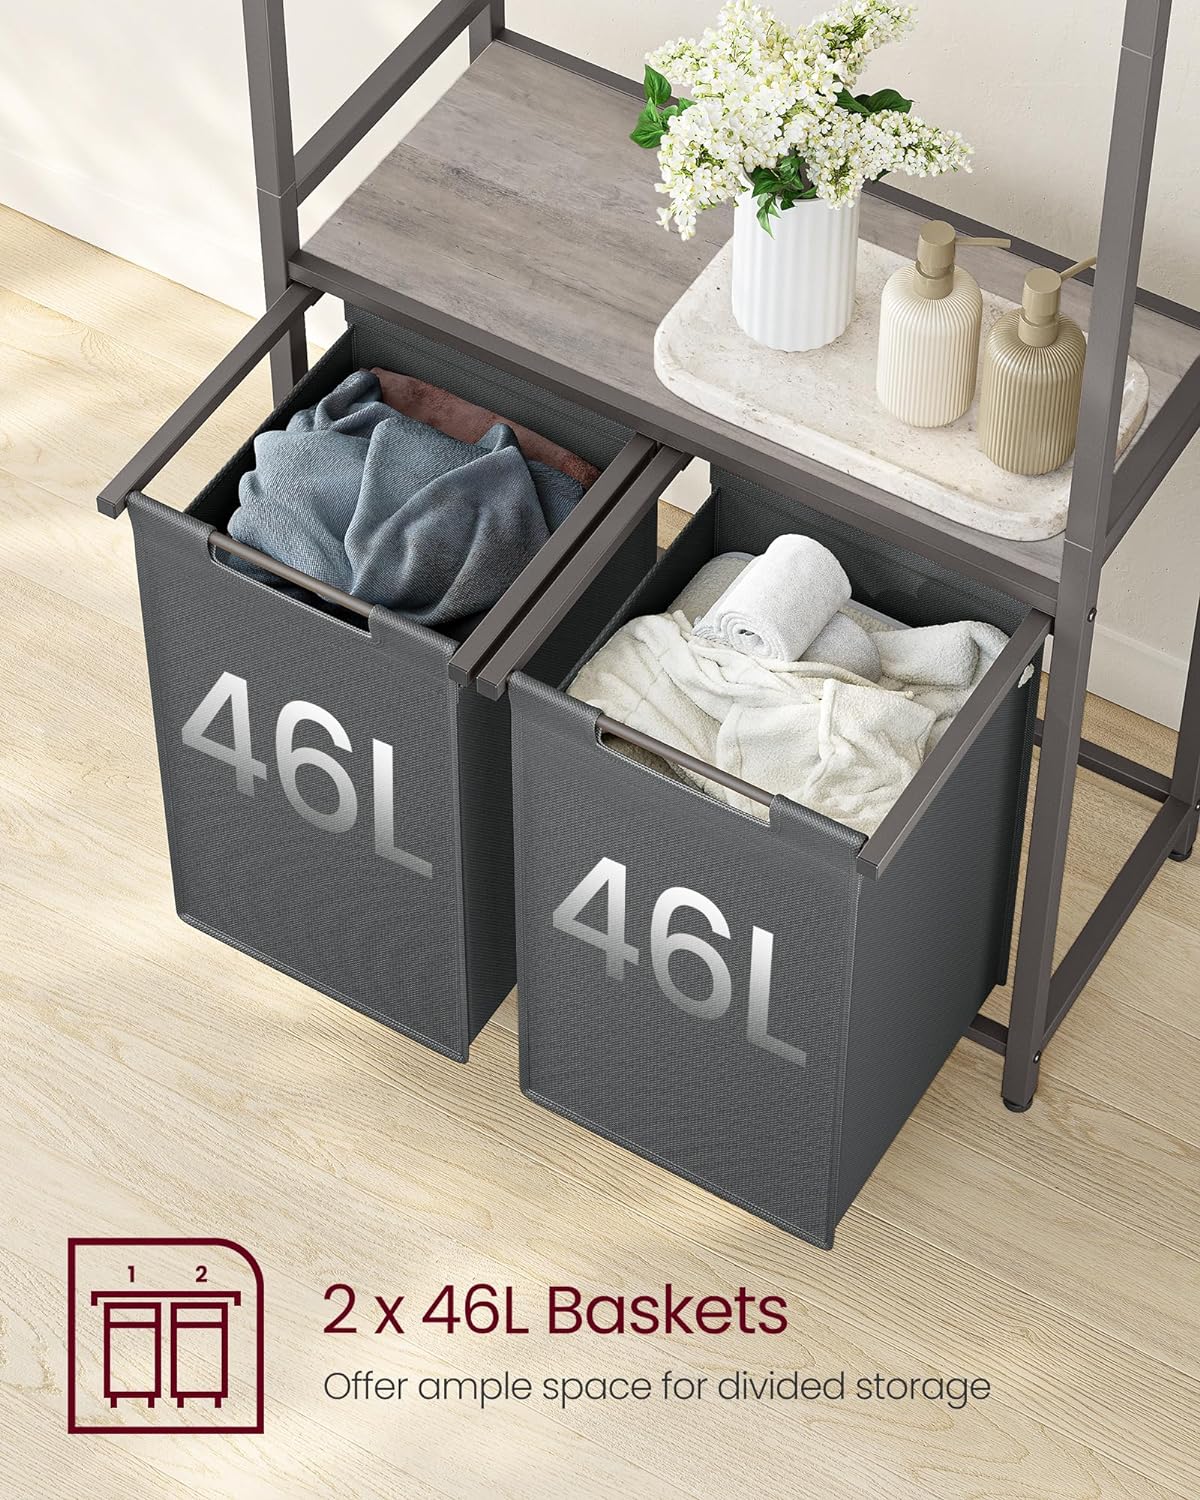 Double Laundry Basket, Grey Laundry Basket, 2-Section Laundry Basket with Removable Liners, 2 x 12.1, VASAGLE, 7